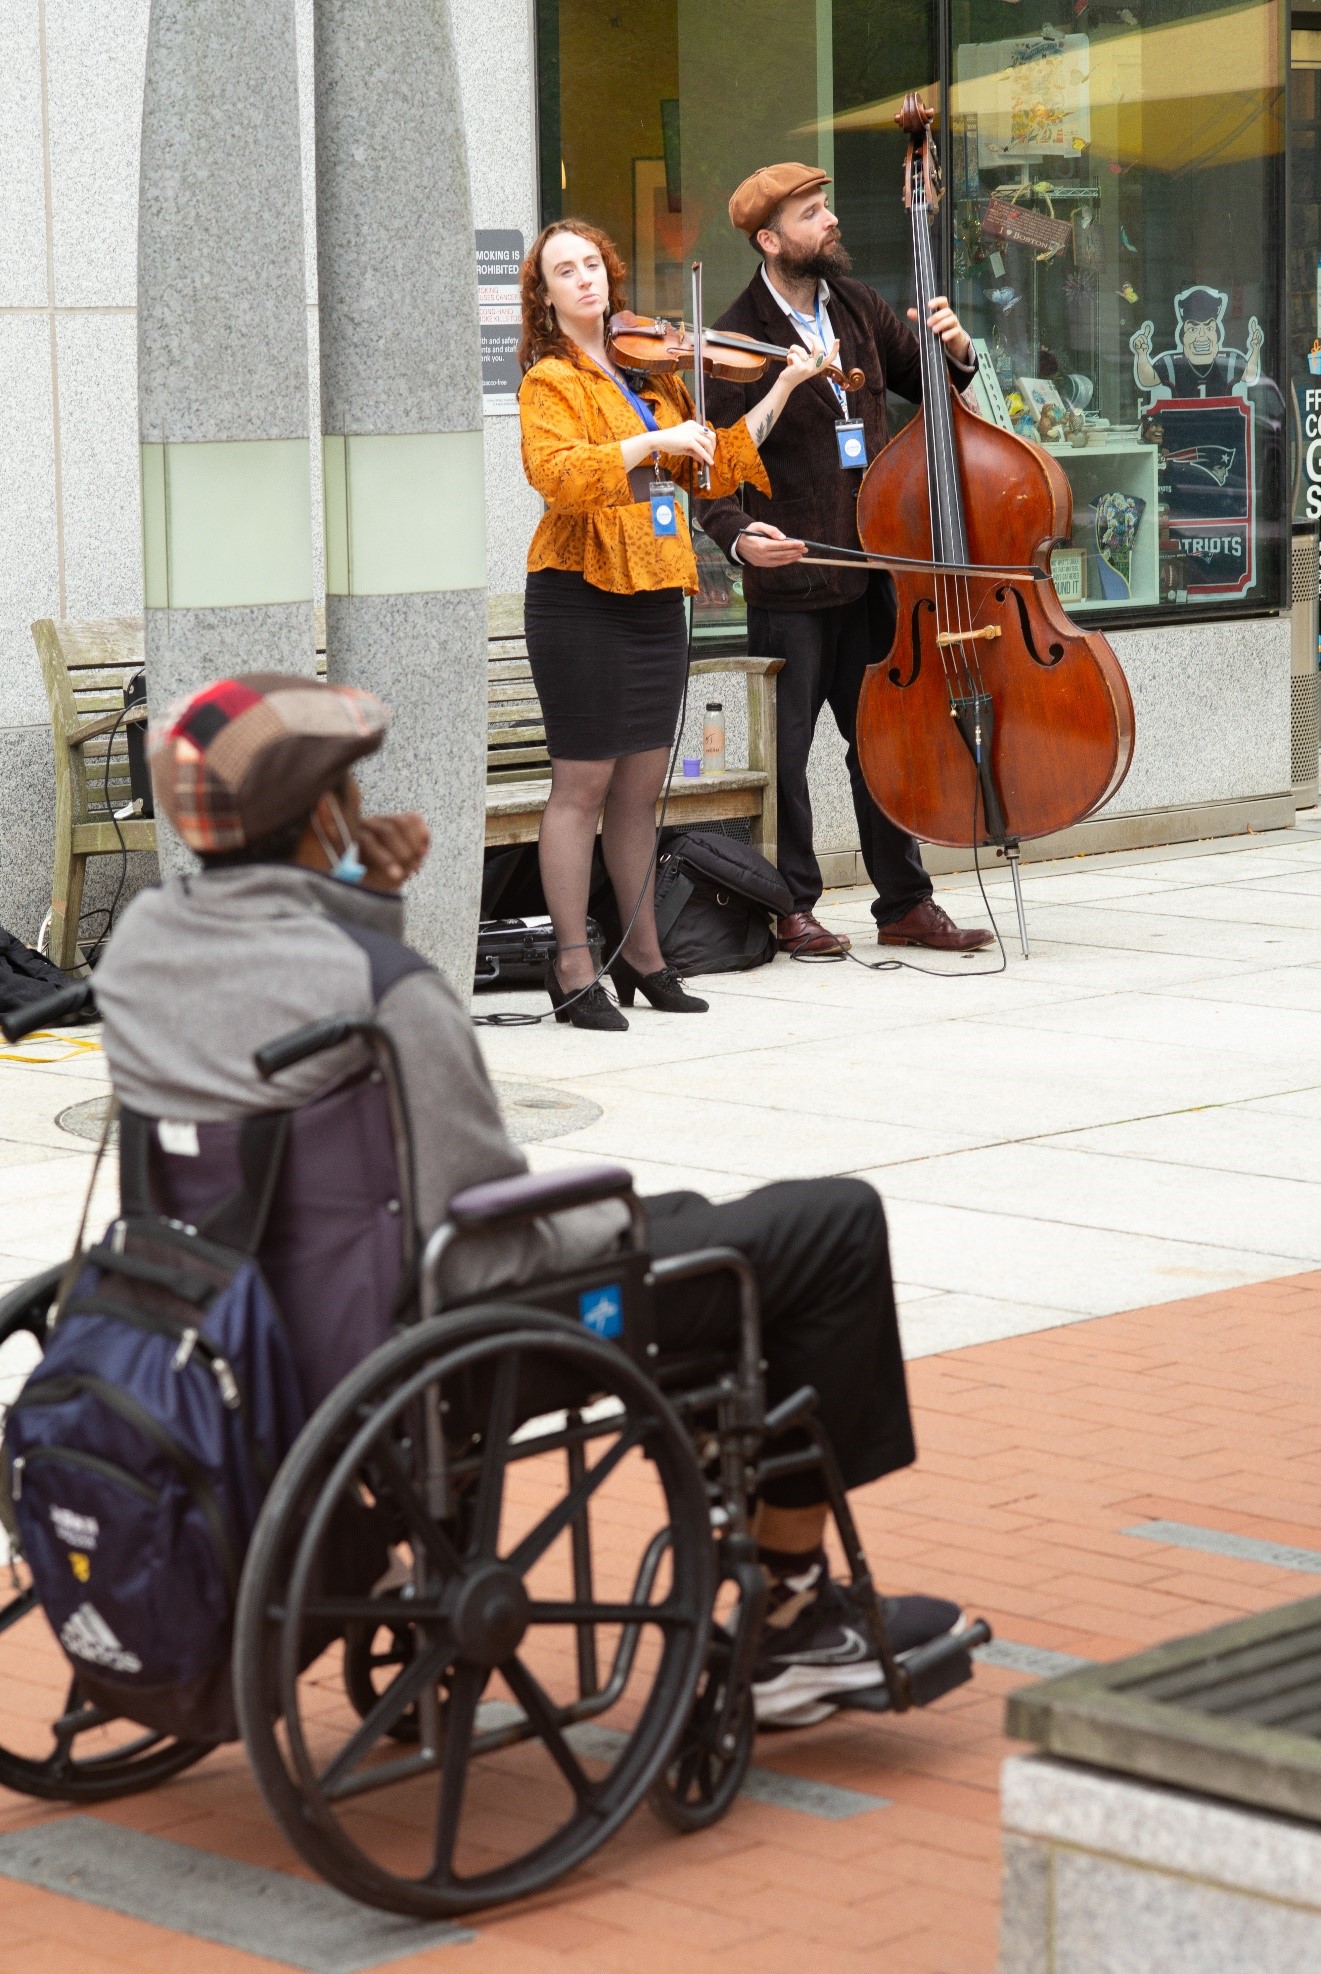 Live music performance with violin and cello